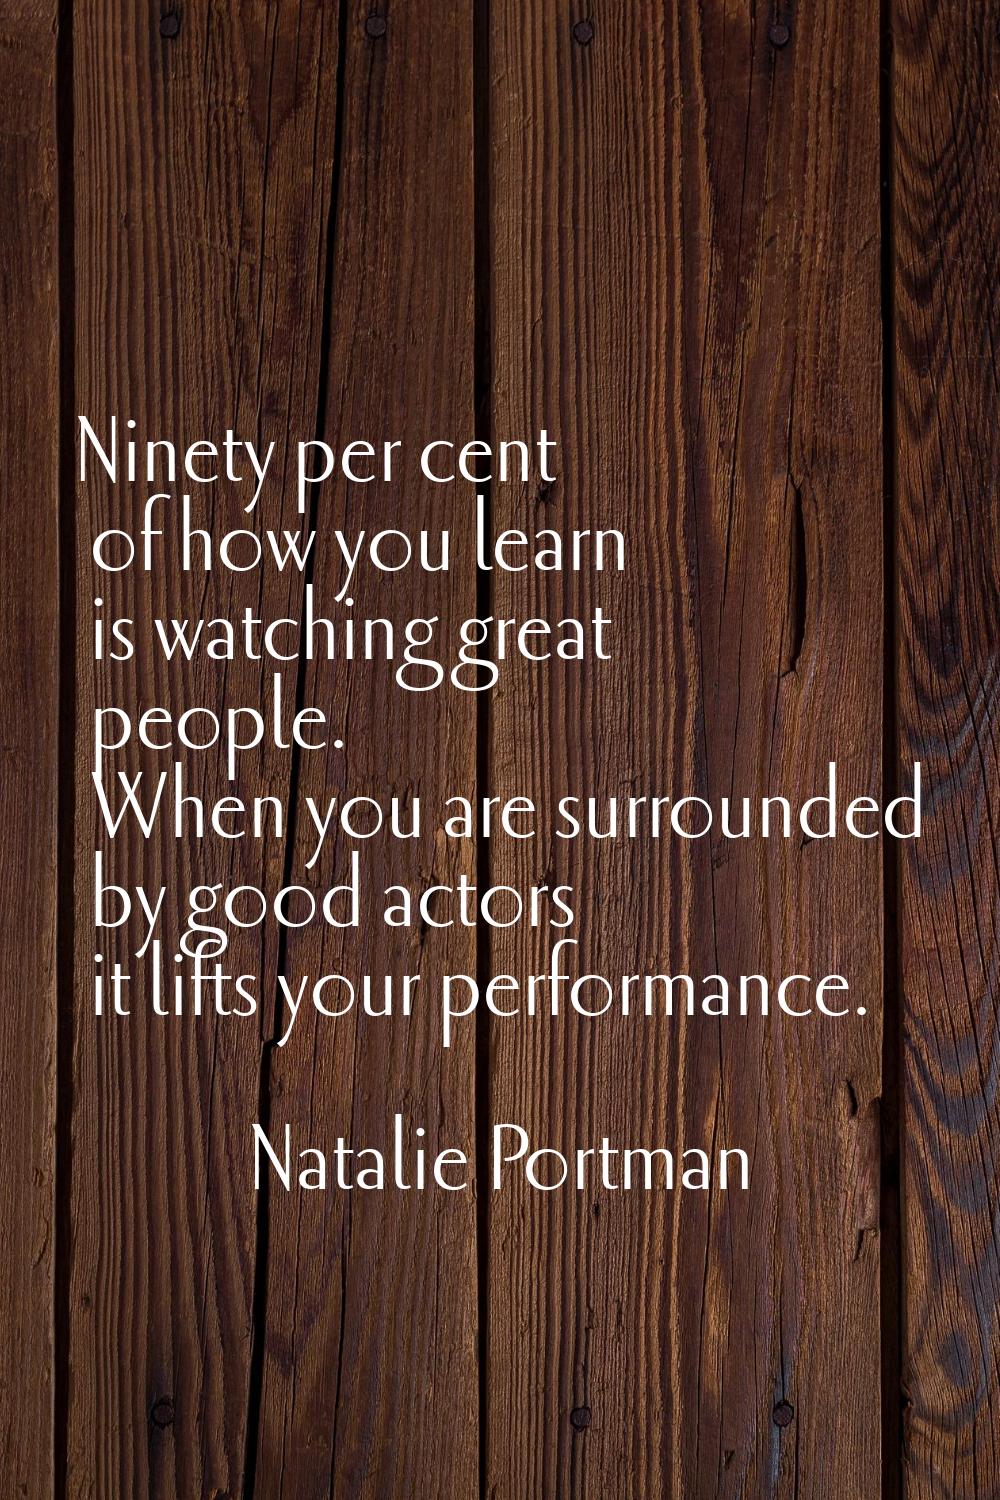 Ninety per cent of how you learn is watching great people. When you are surrounded by good actors i